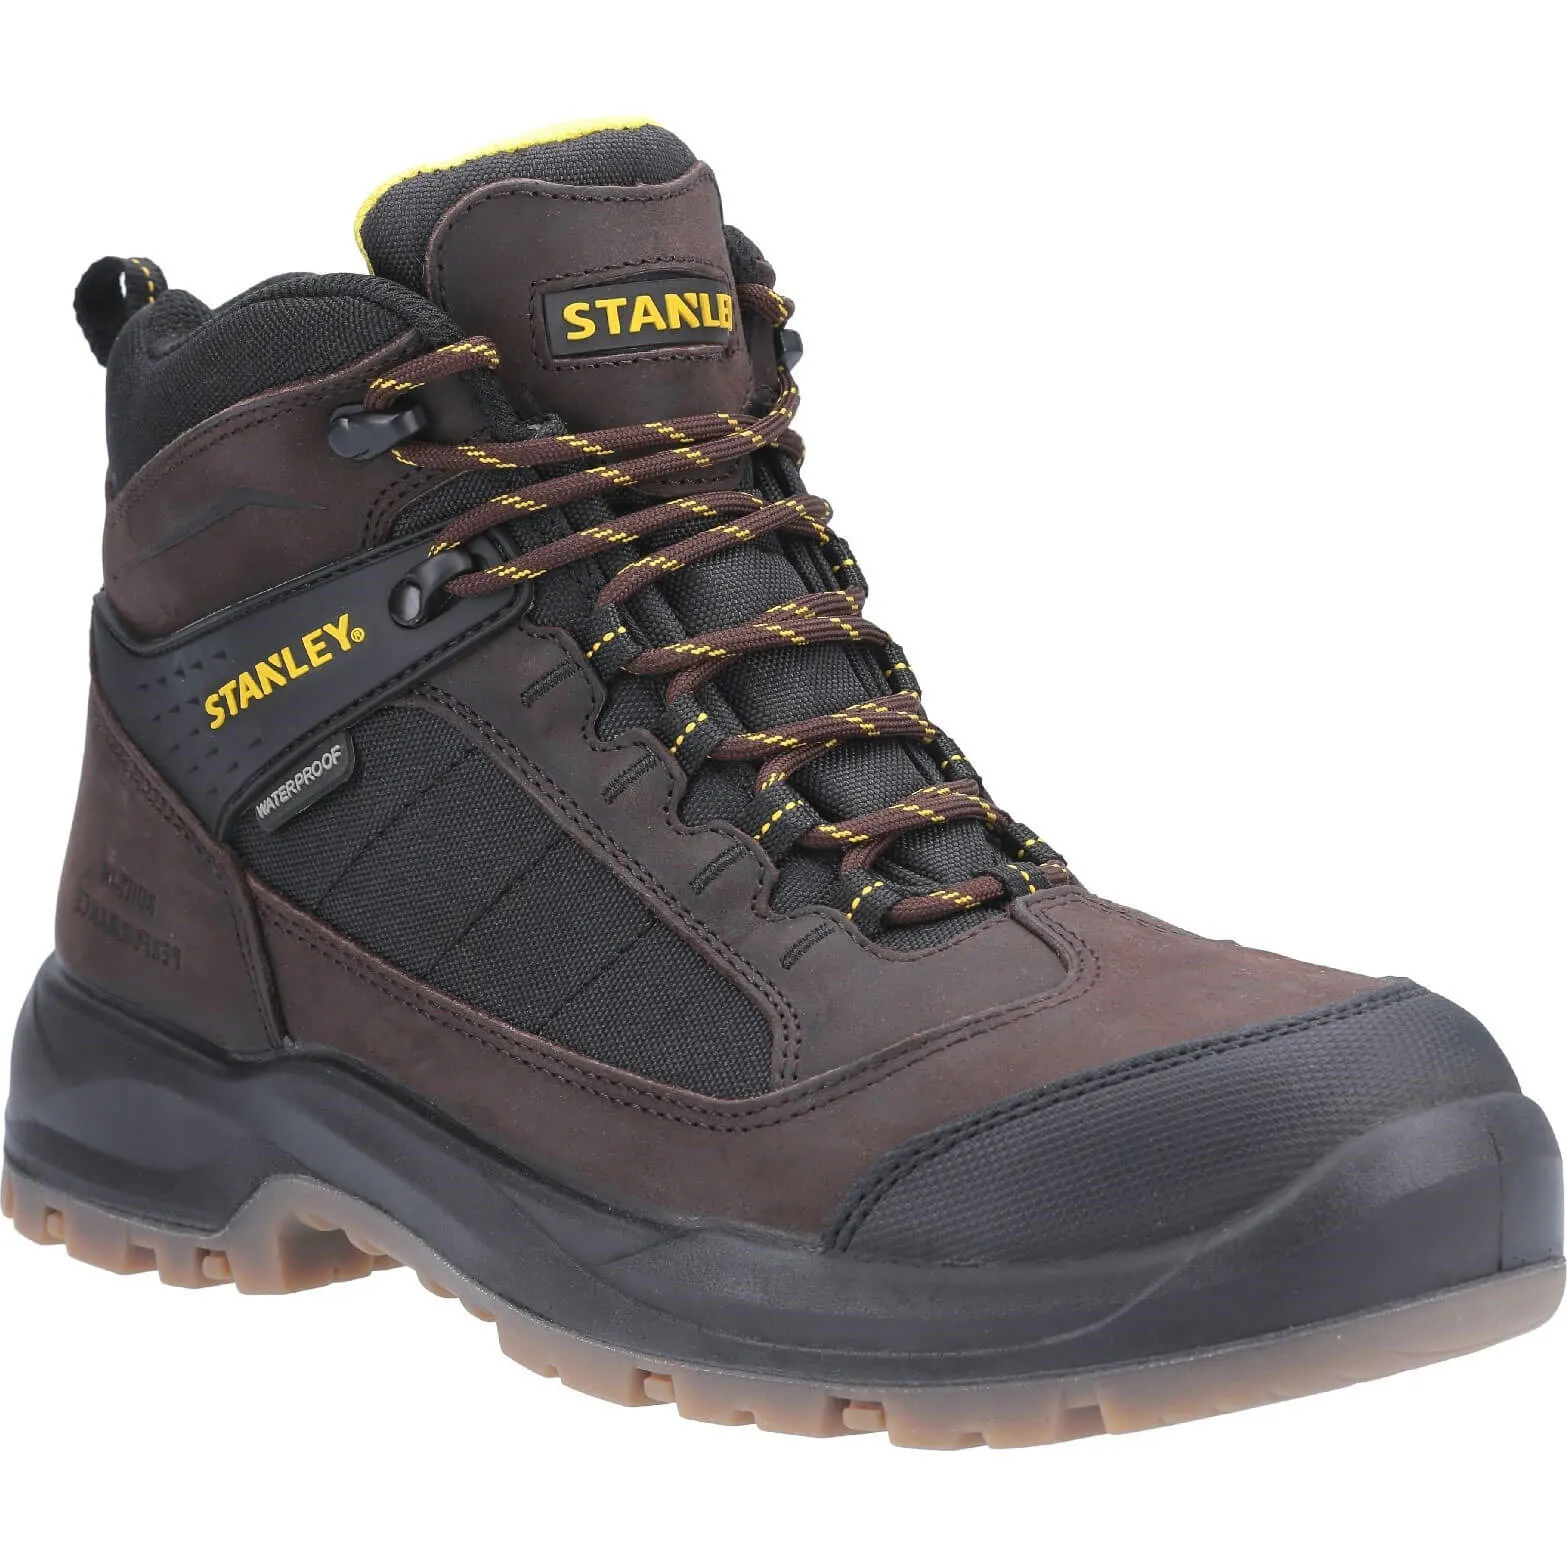 Stanley Berkeley Safety Boot - Brown, Size 10